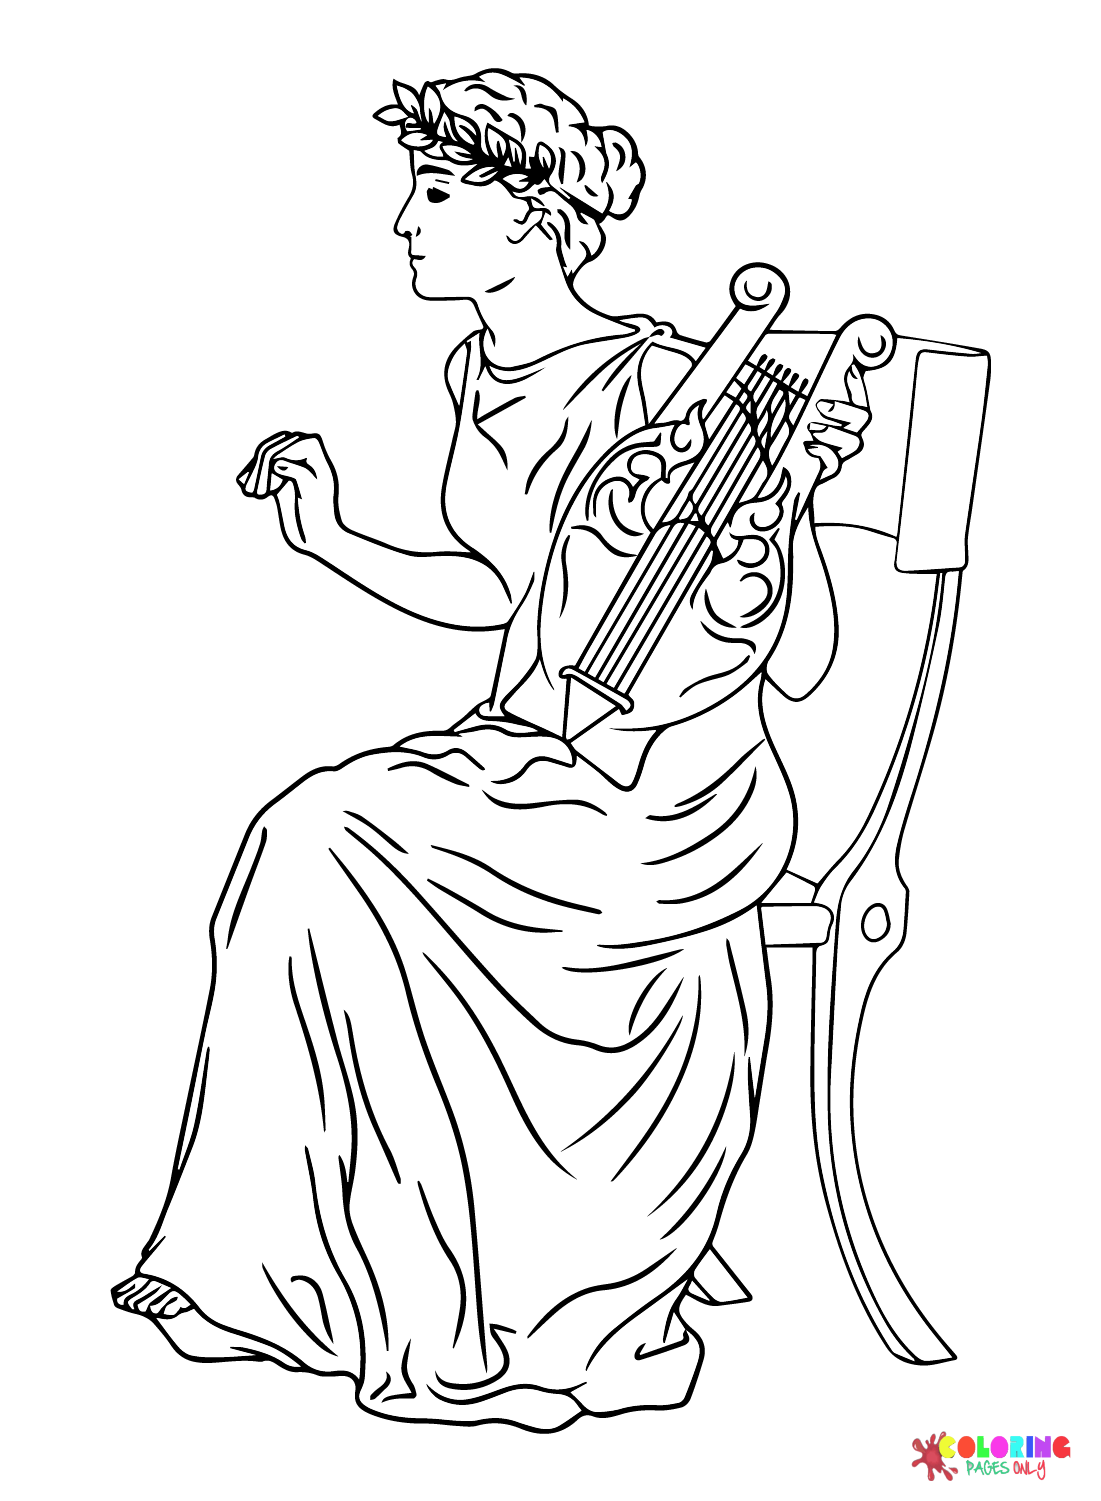 Ancient Greek Woman Goddess of Art Coloring Page